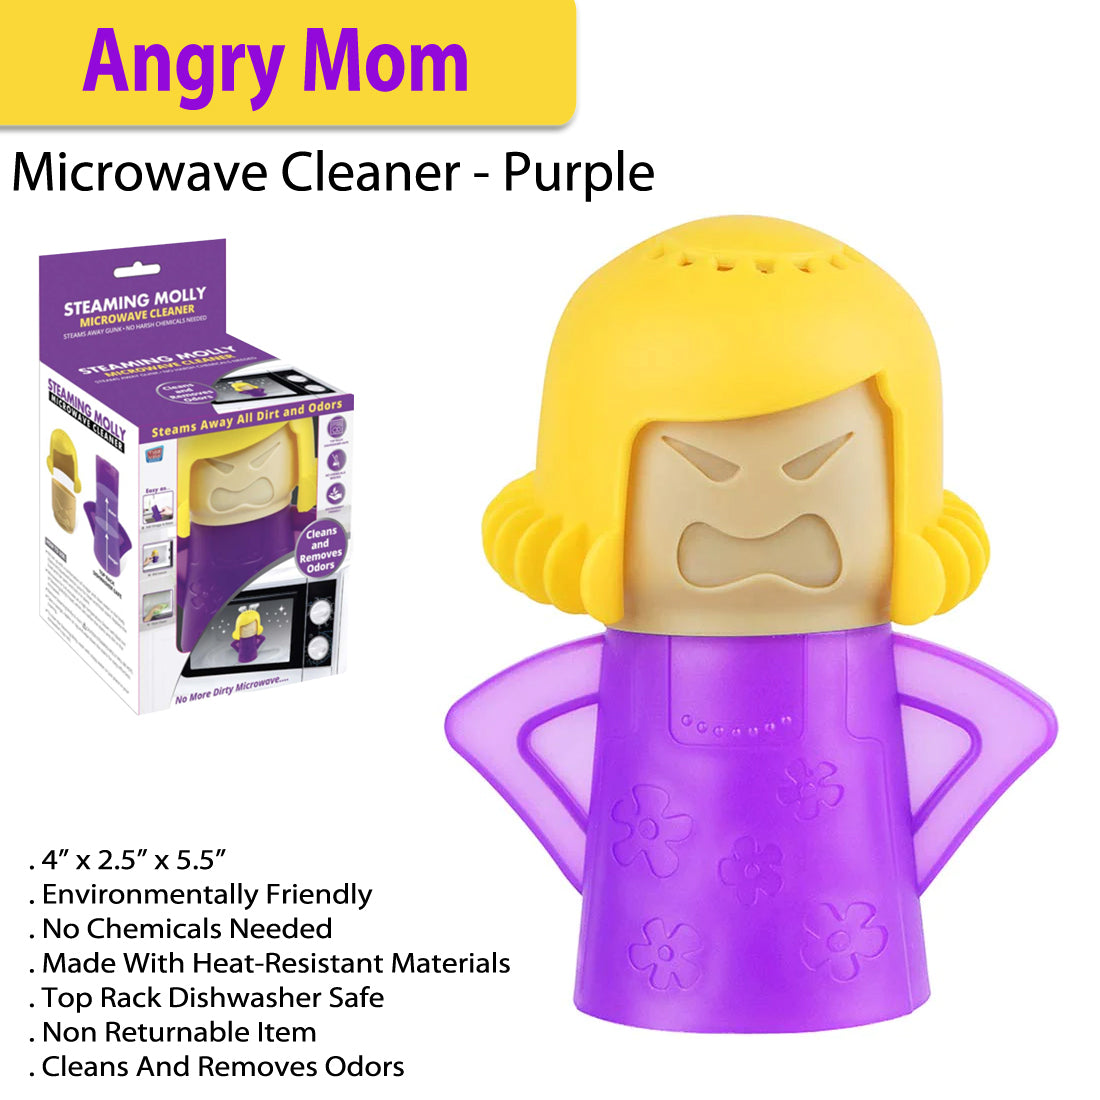 Angry Mom Microwave Oven Cleaner Tool, Mama Steam Cleaner